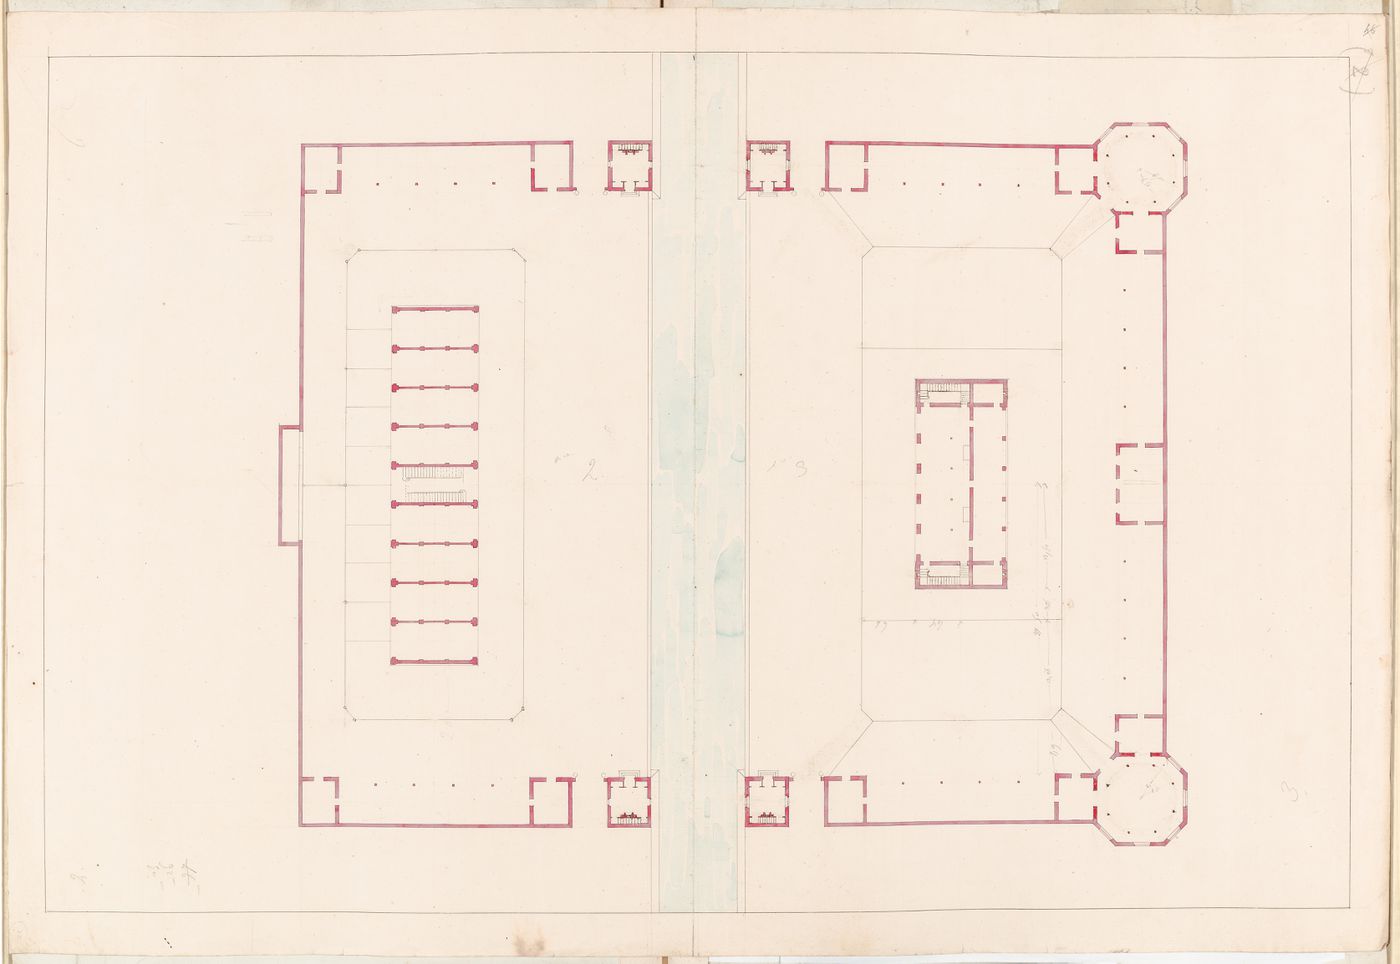 Project for Clos d'équarrissage, fôret de Bondy: Ground floor plan for a slaughterhouse and a factory for the preservation of muscles